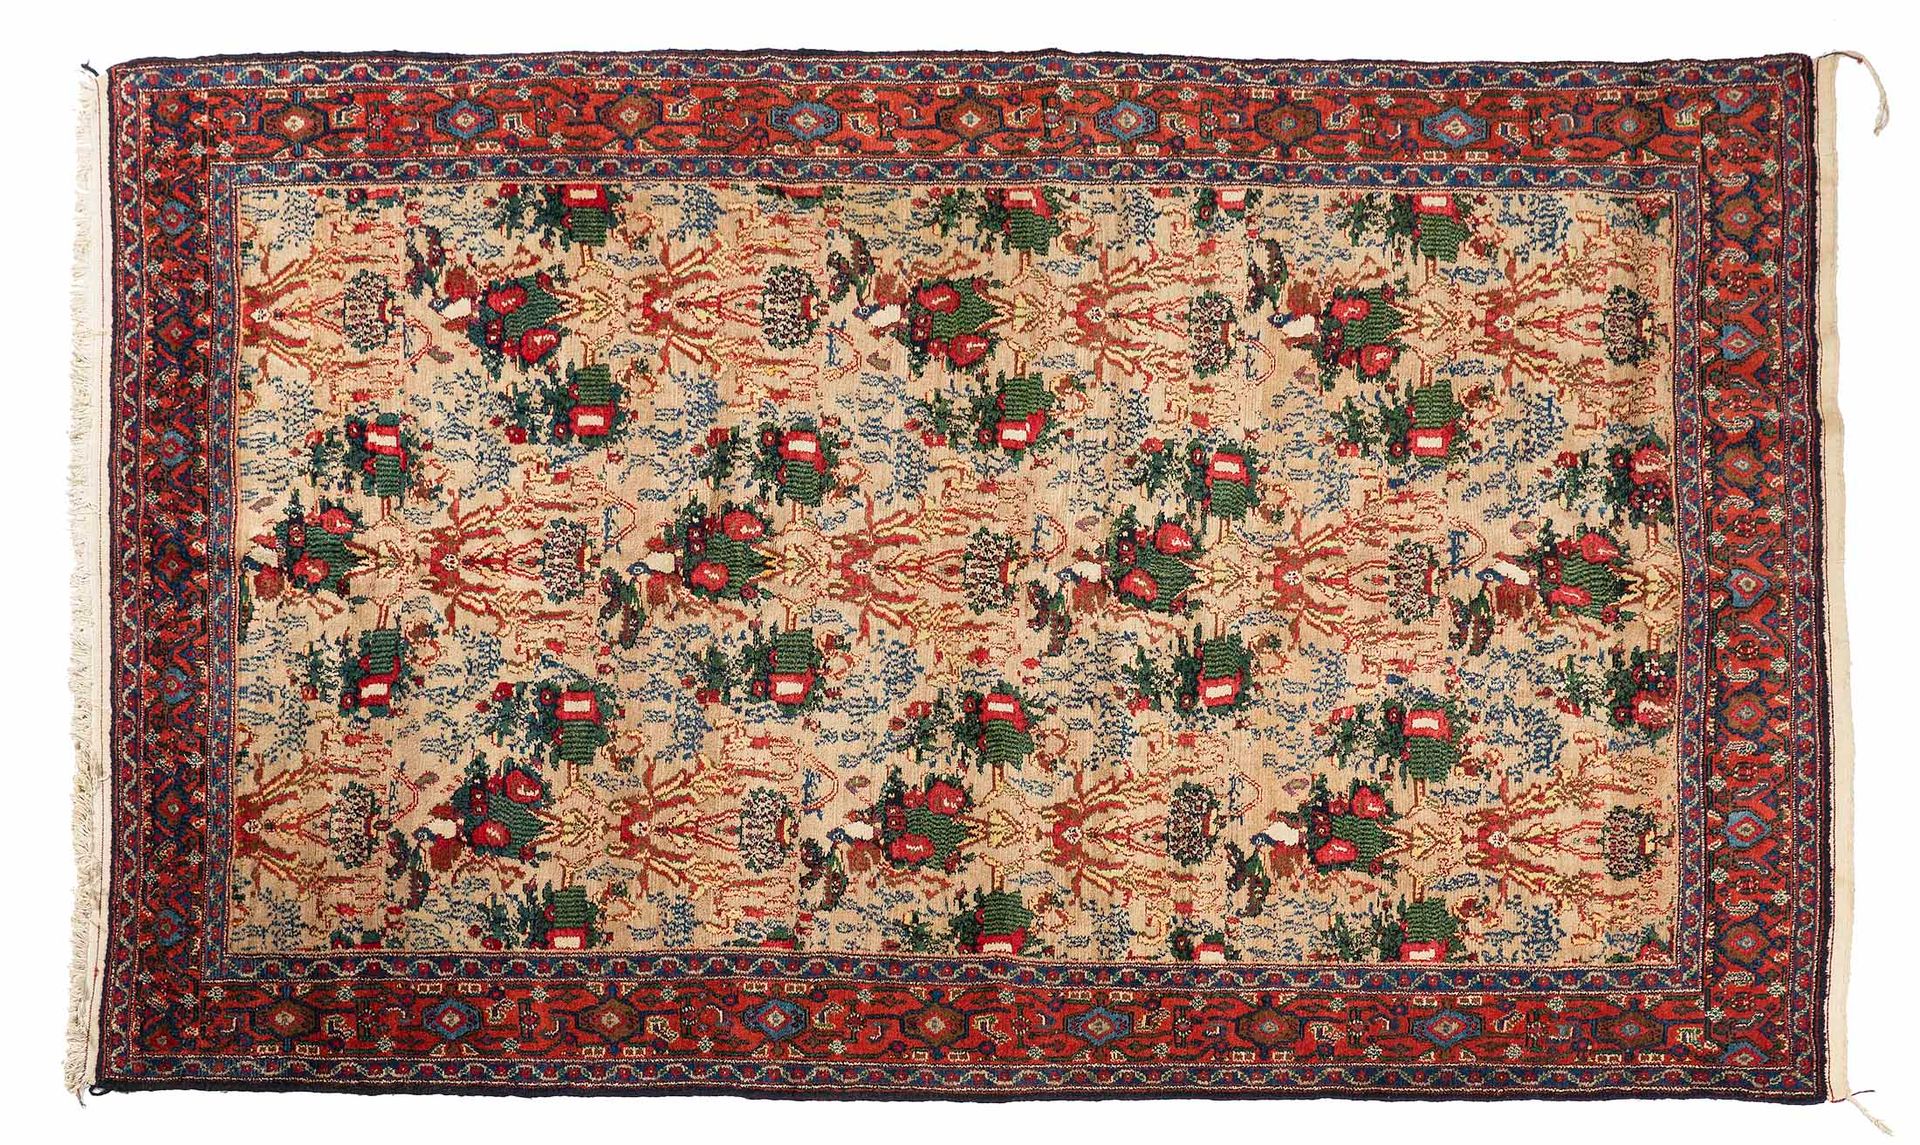 Null SENNEH carpet (Persia), 1st third of the 20th century

Dimensions : 250 x 1&hellip;